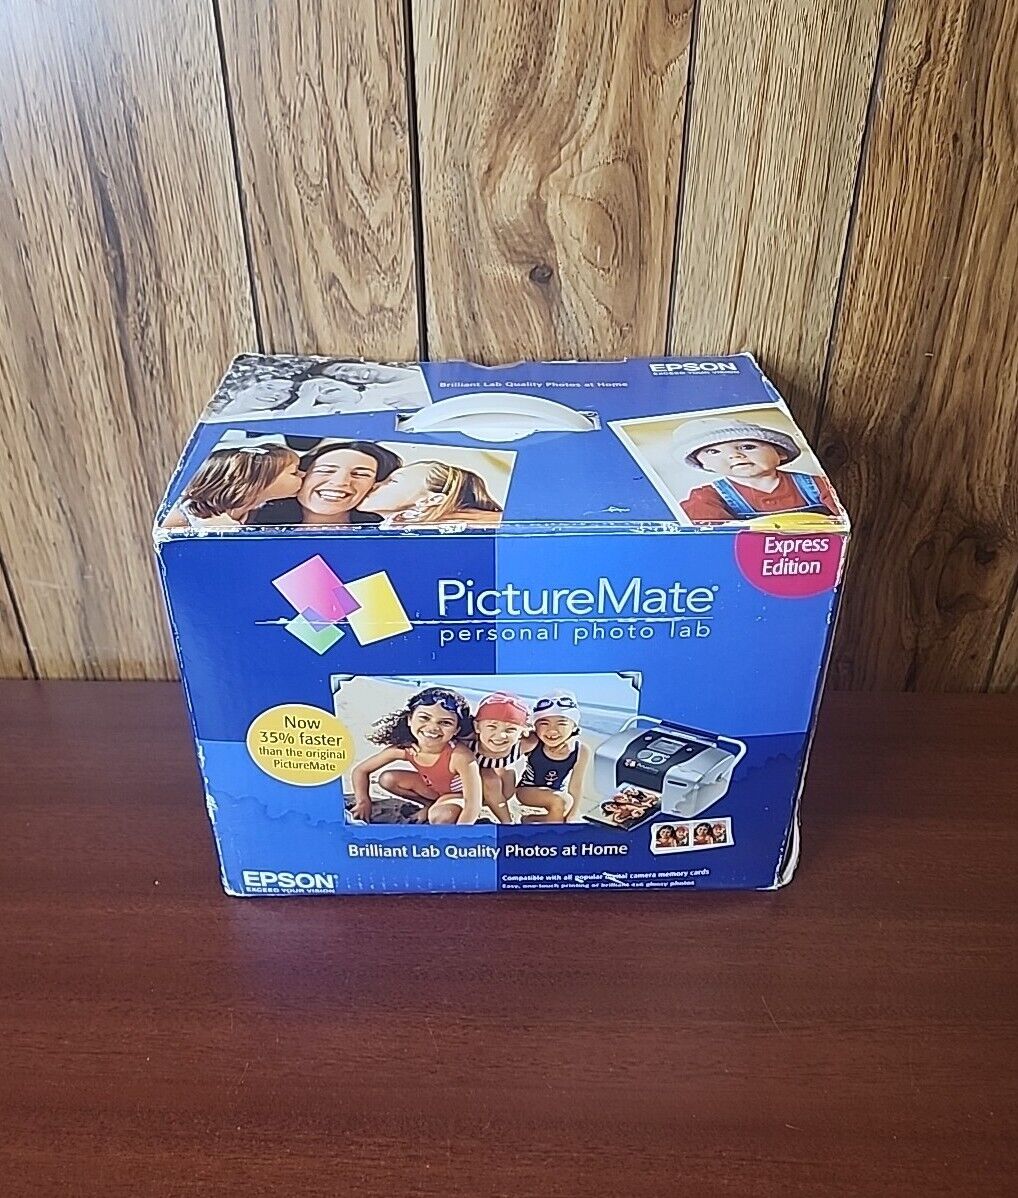 Epson PictureMate Express Digital Personal Photo Lab Inkjet Printer New in Box